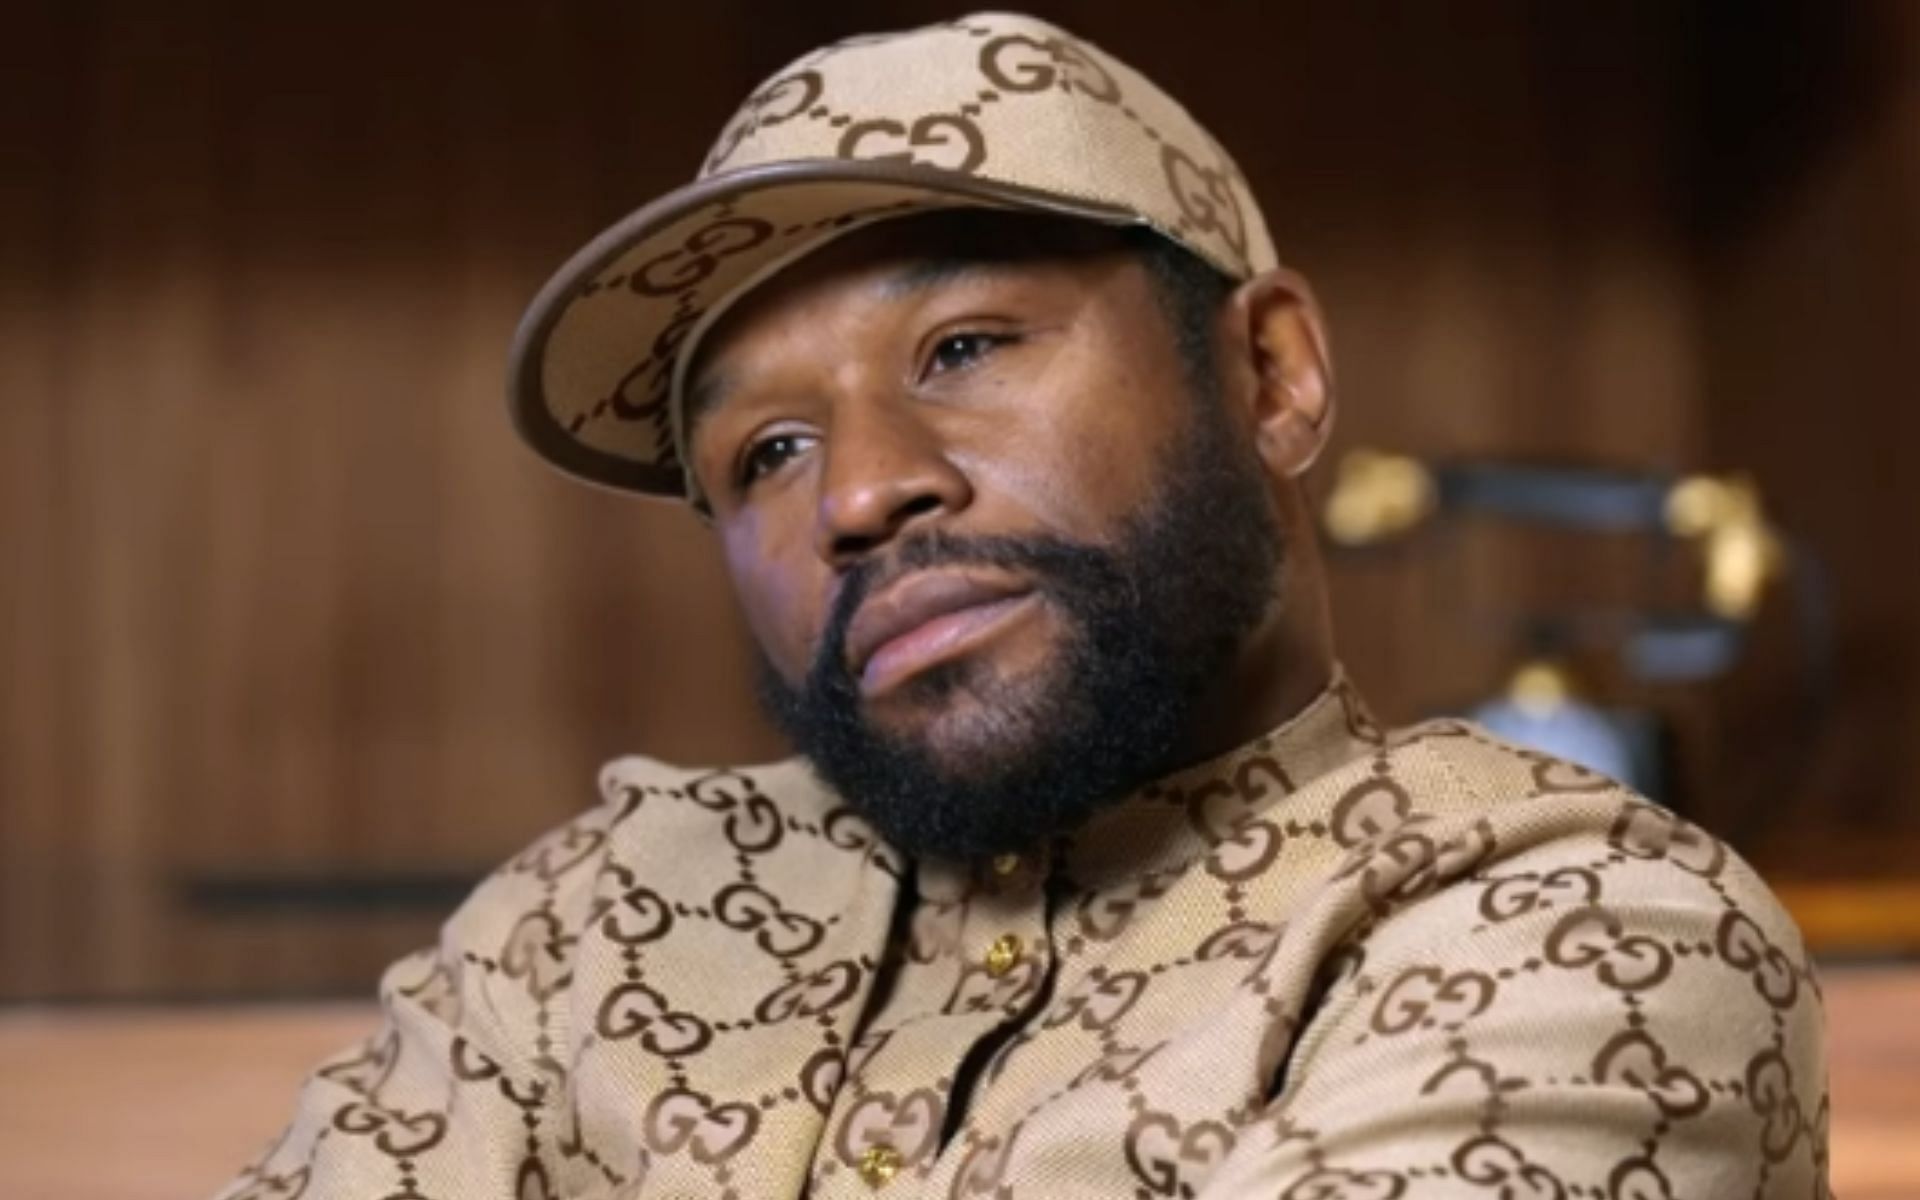 Floyd Mayweather grieves at the loss of the one person who knew his innermost secrets